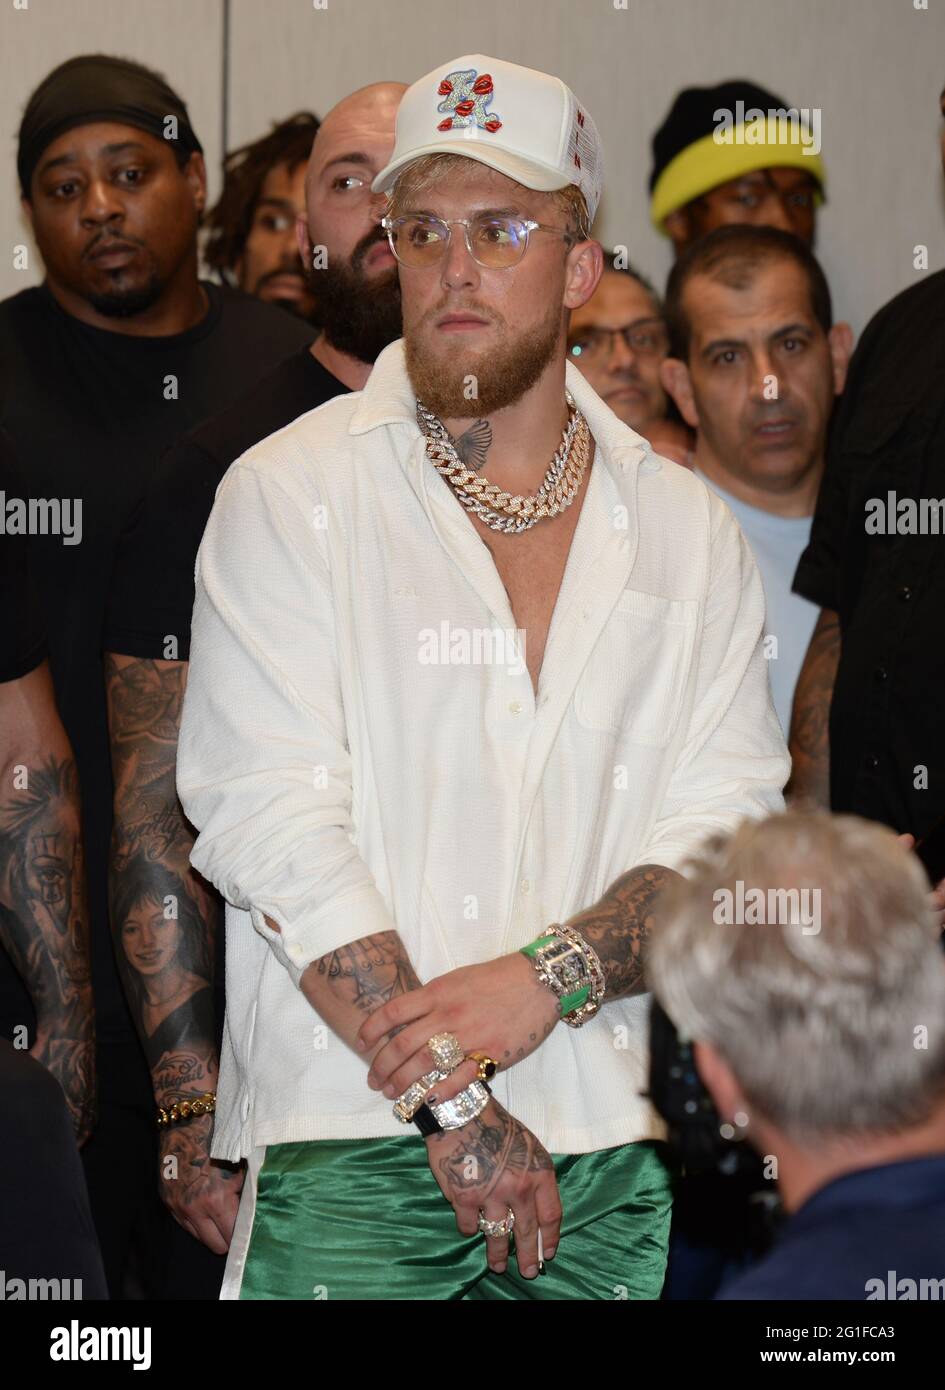 Miami Gardens FL, USA. 06th June, 2021. Jake Paul is seen as Logan Paul speaks during a press conference after his fight with Floyd Mayweather during their contracted exhibition boxing match at Hard Rock Stadium in Miami Gardens on June 6, 2021 in Miami Gardens, Florida. Credit: Mpi04/Media Punch/Alamy Live News Stock Photo